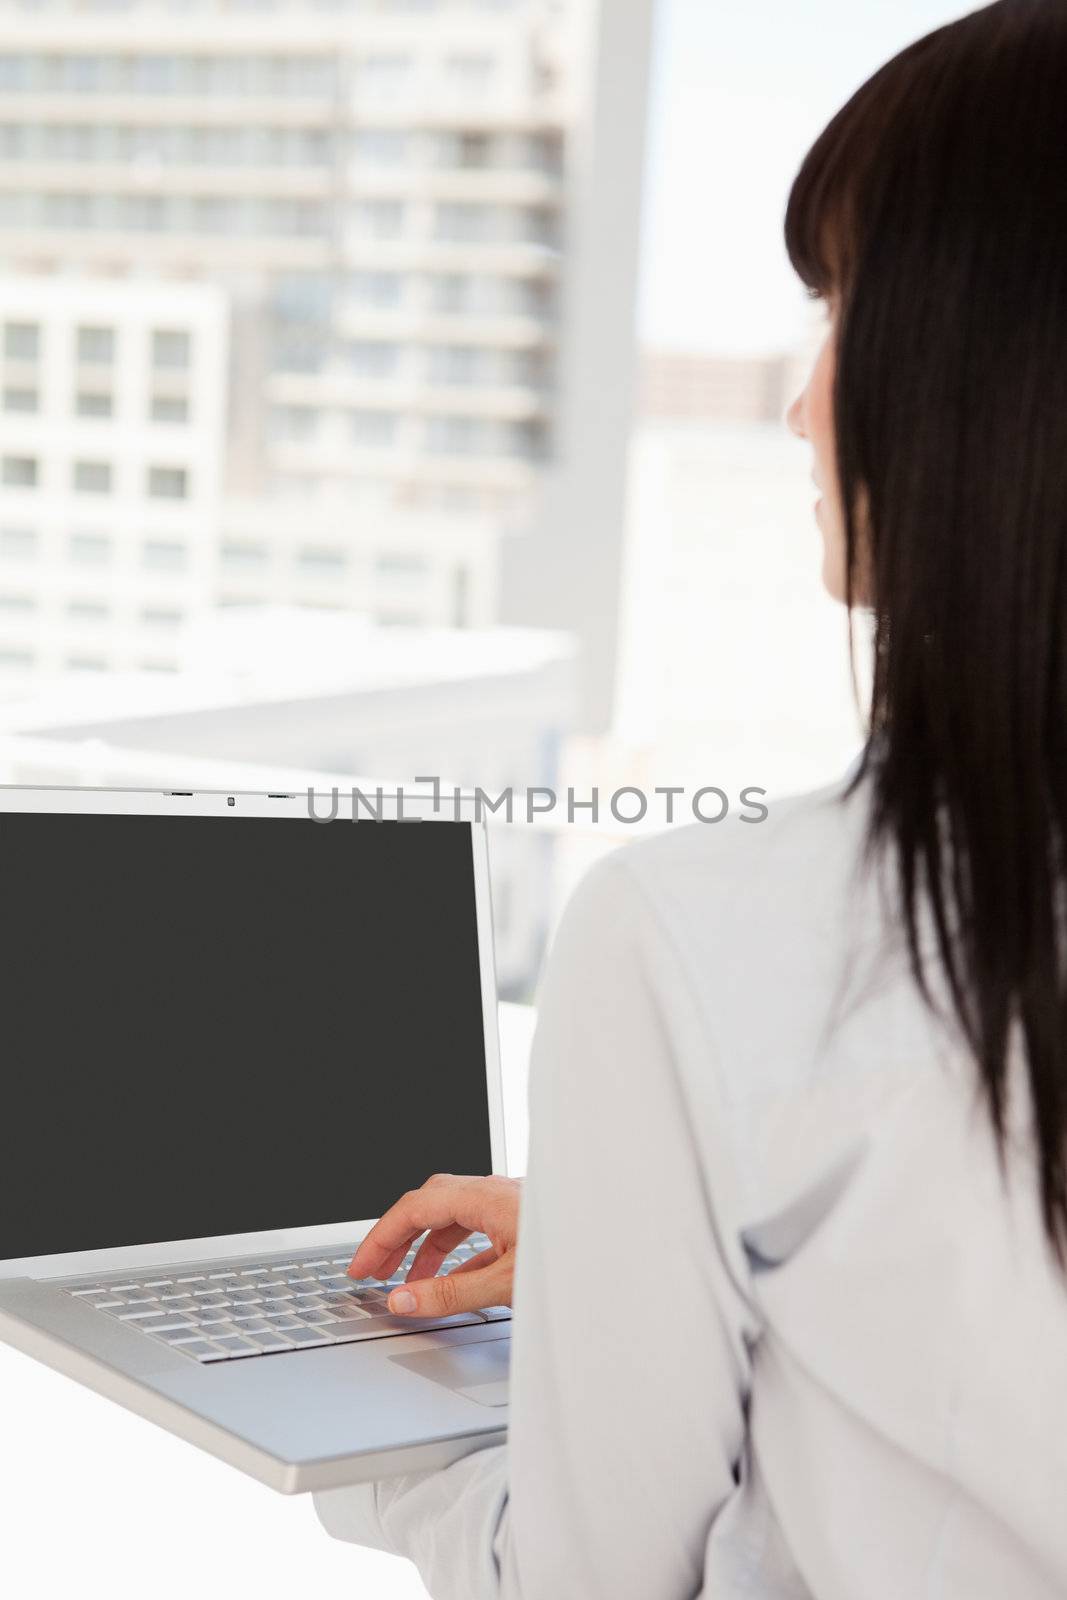 A business woman at work using her laptop while she looks out the window